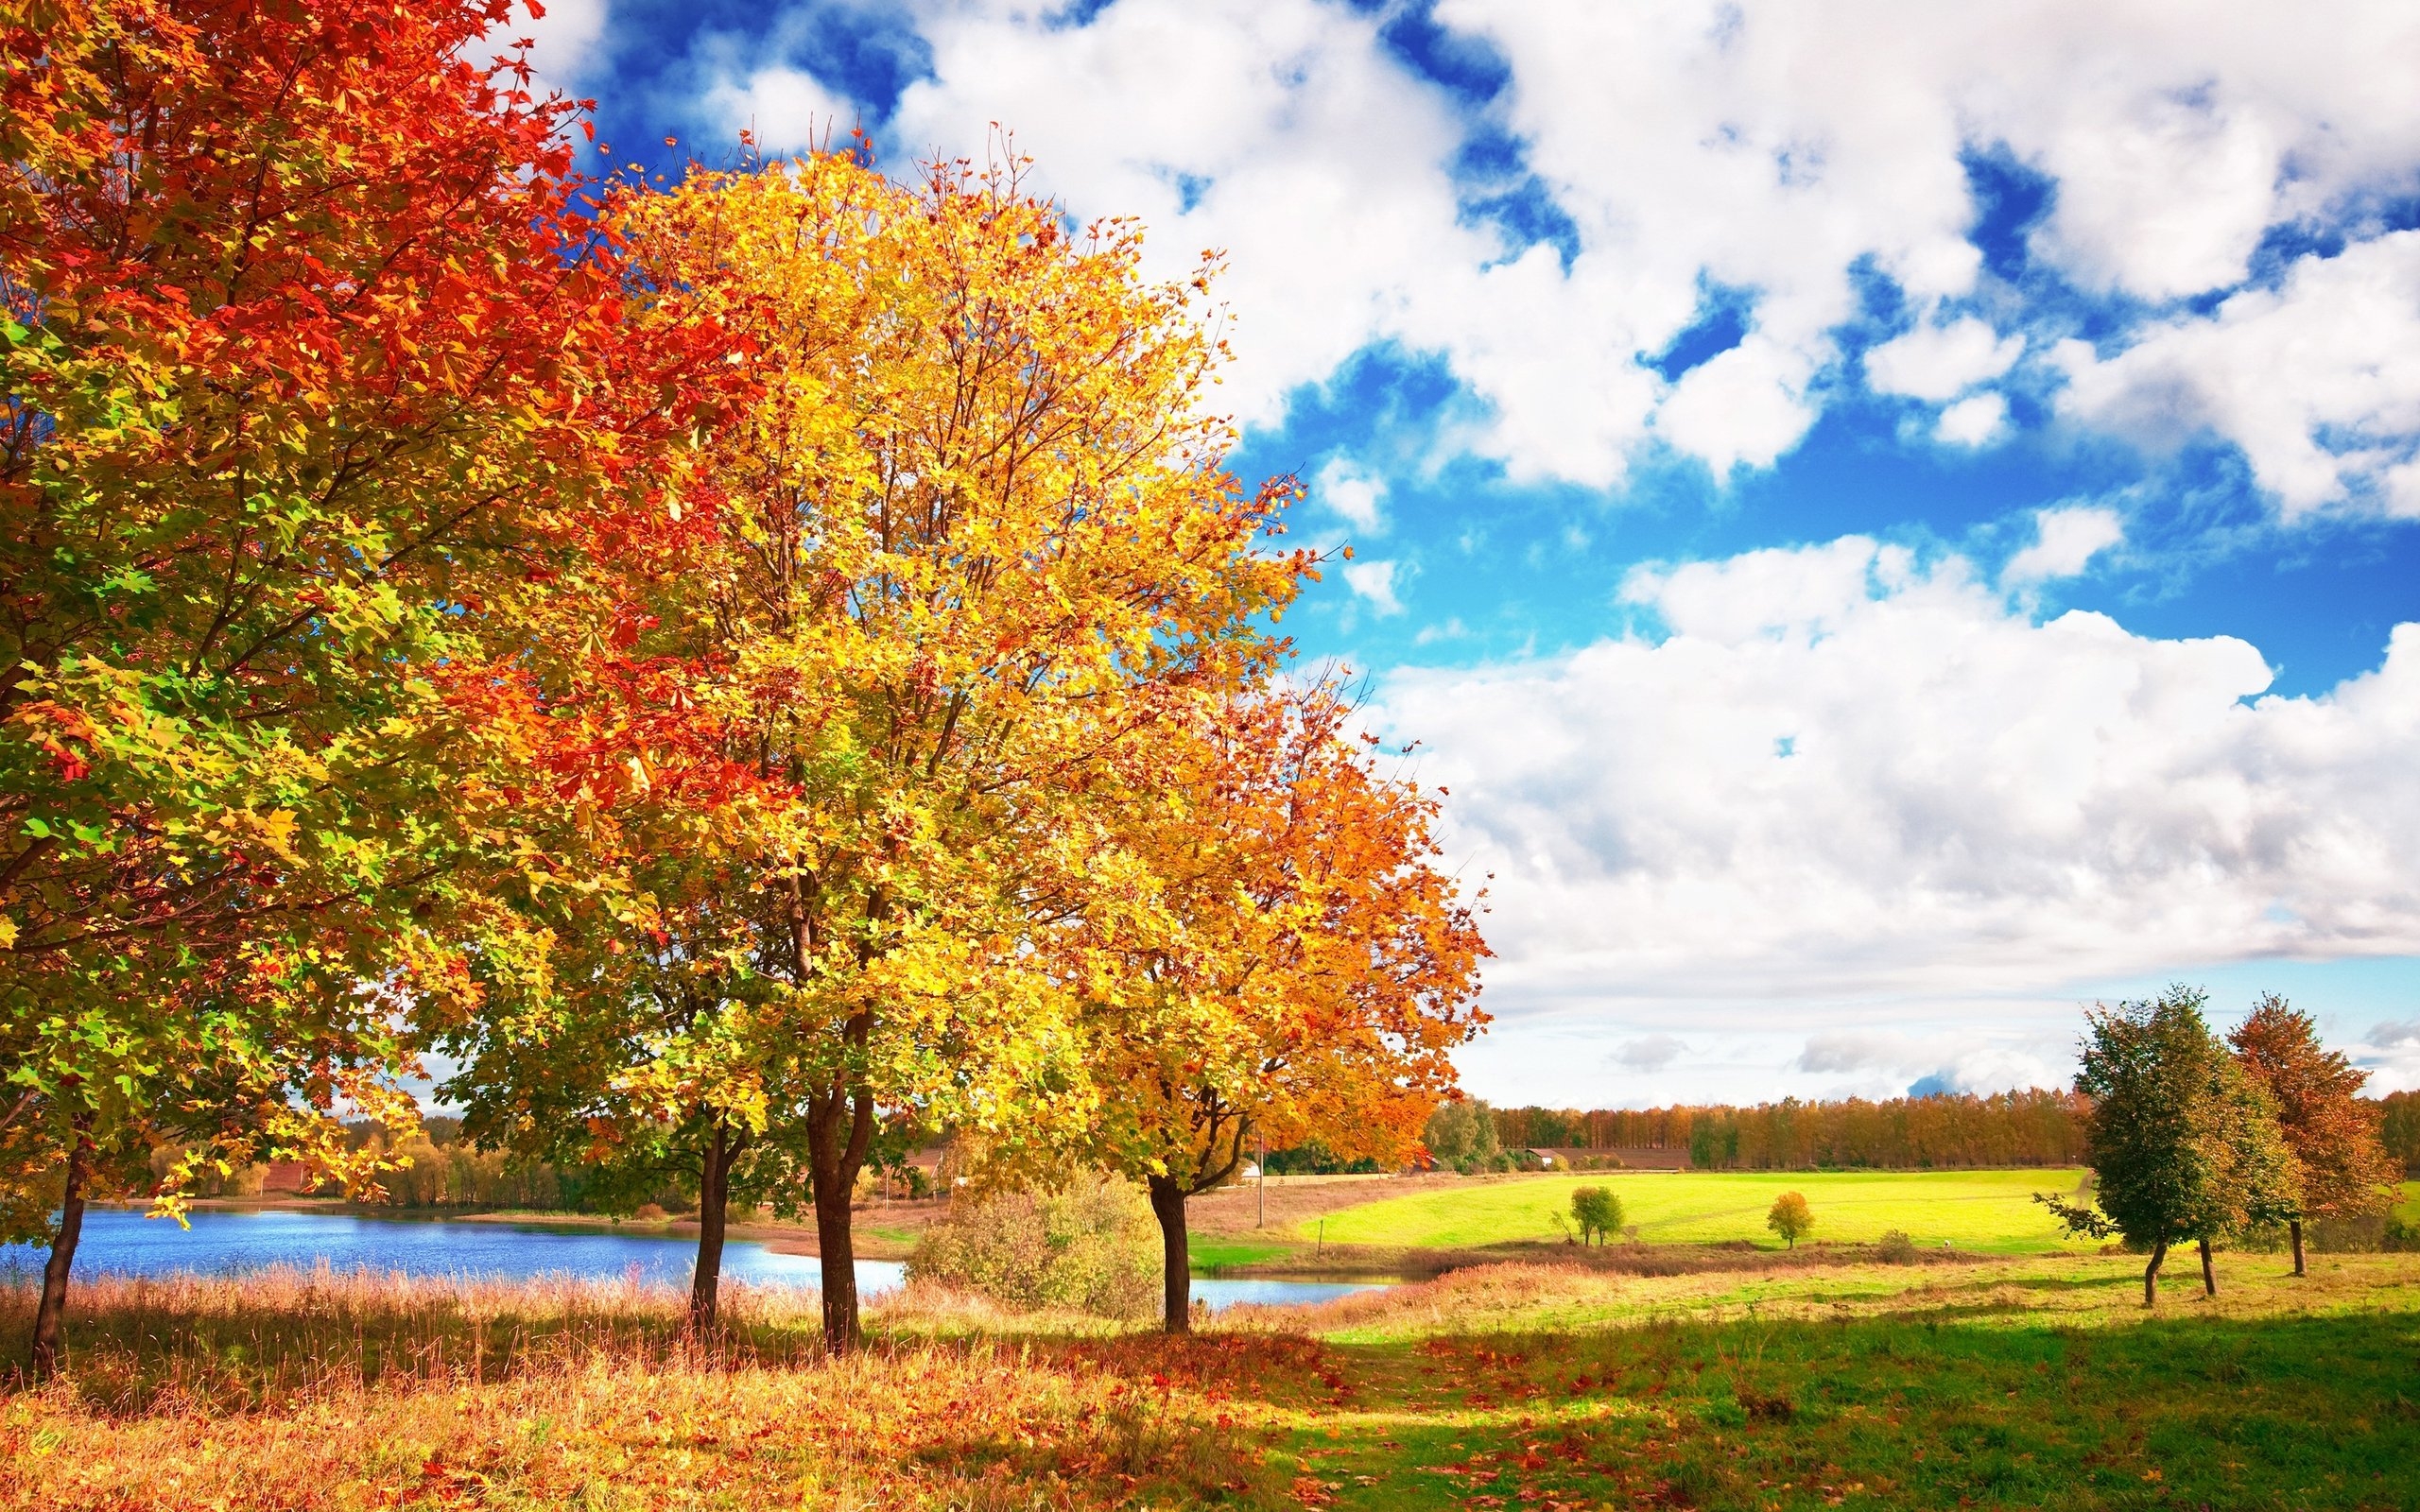 Autumn Landscape wallpapers and images - wallpapers ...